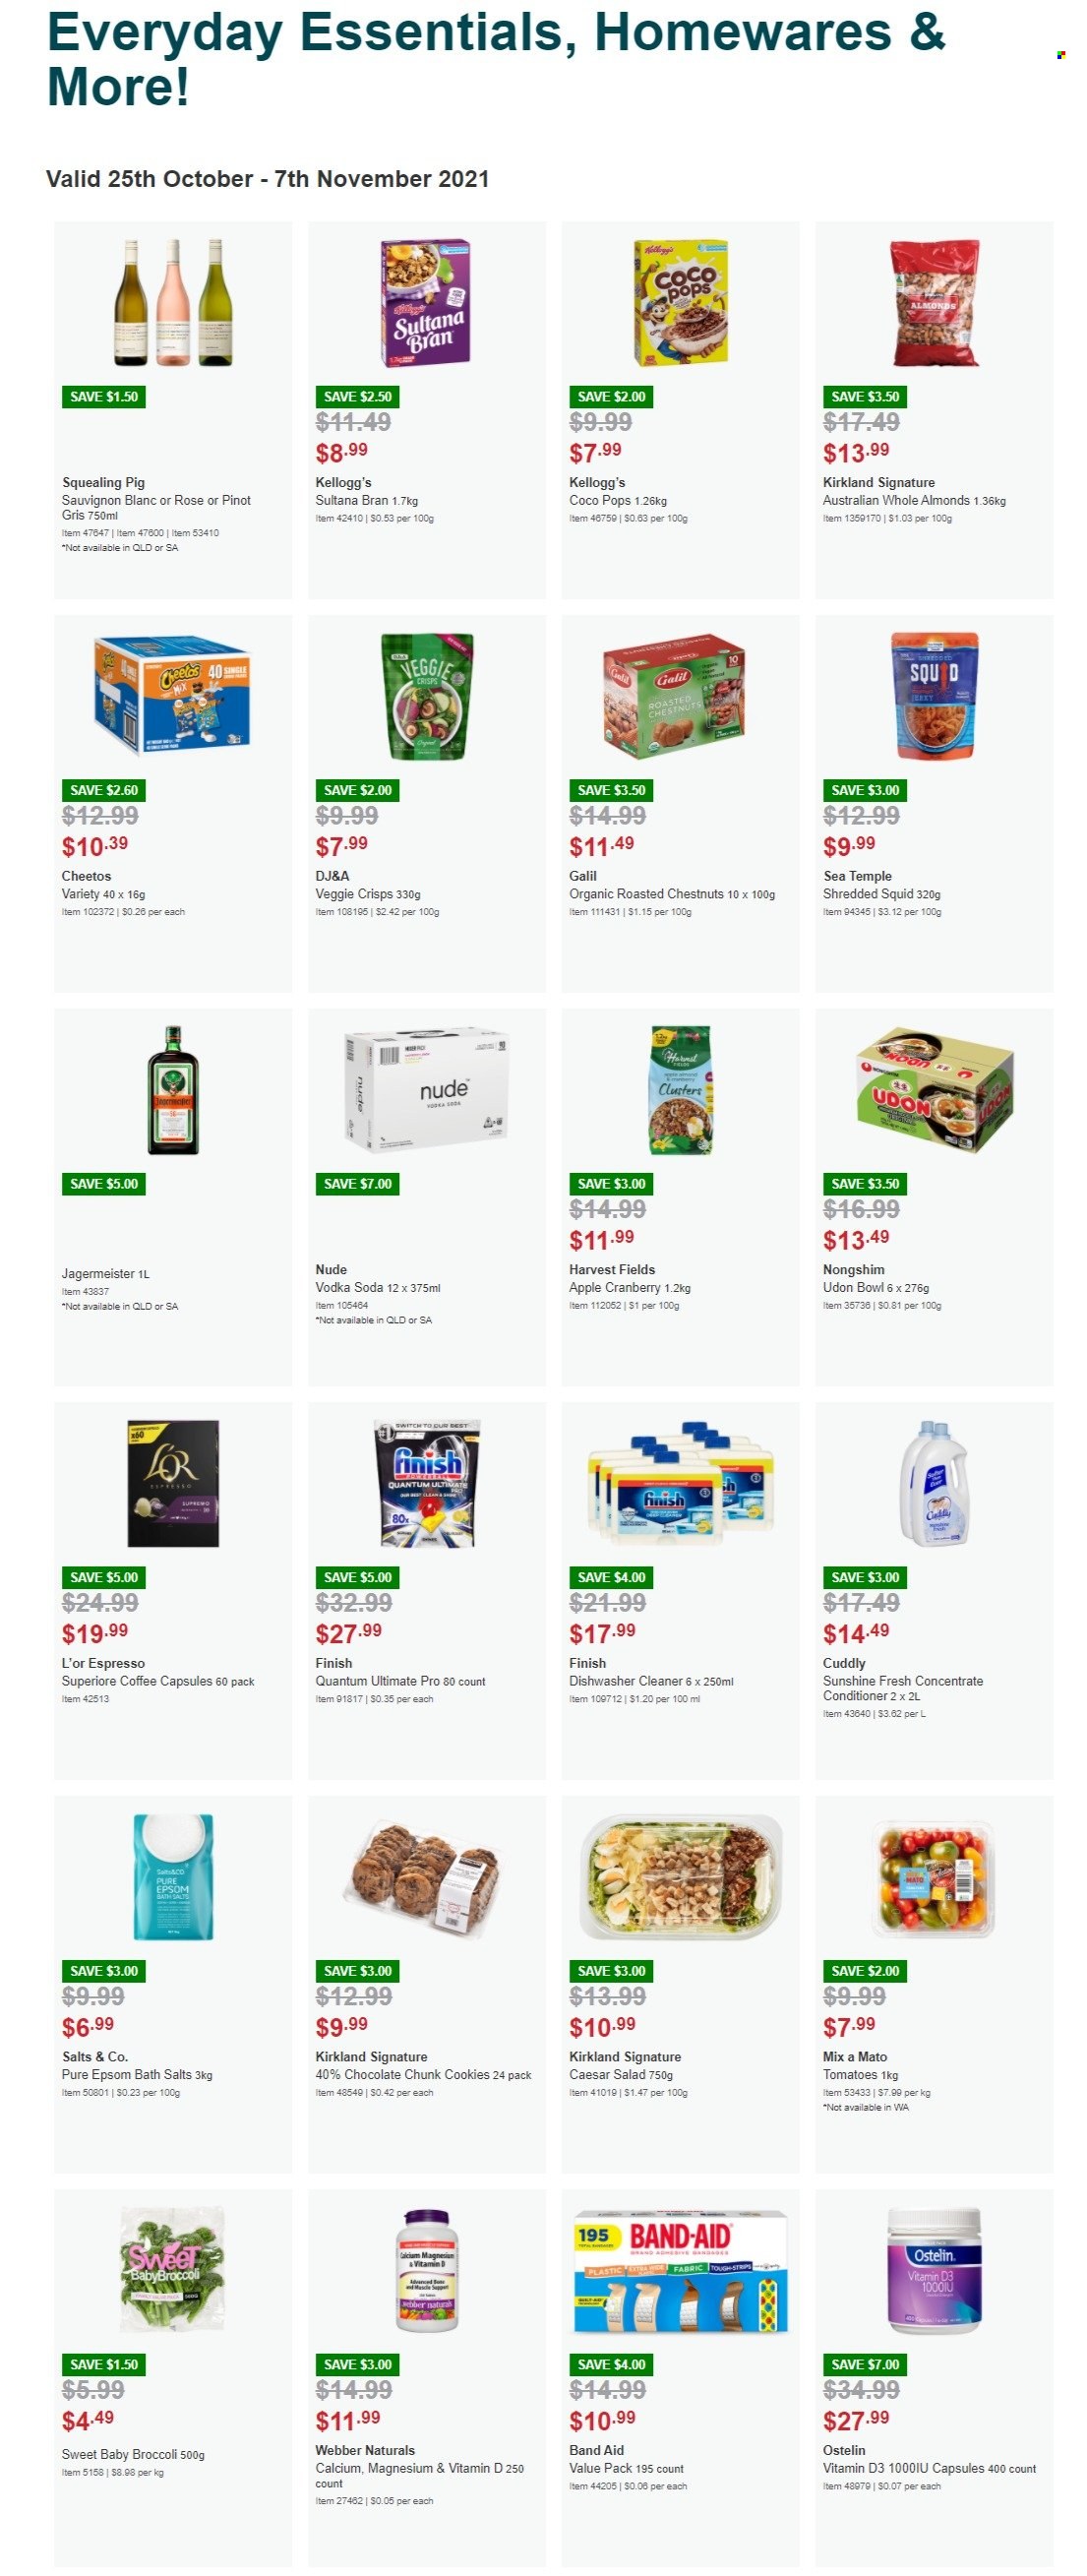 thumbnail - Costco Catalogue - Sales products - Apple, cookies, chocolate, Kellogg's, Cheetos, coco pops, almonds, chestnuts, switch, soda, coffee, coffee capsules, L'Or, white wine, wine, Pinot Grigio, Sauvignon Blanc, rosé wine, vodka, Jägermeister, cleaner, dishwashing liquid, dishwasher cleaner, conditioner, bowl, calcium, magnesium, vitamin D3, Ostelin, band-aid. Page 3.